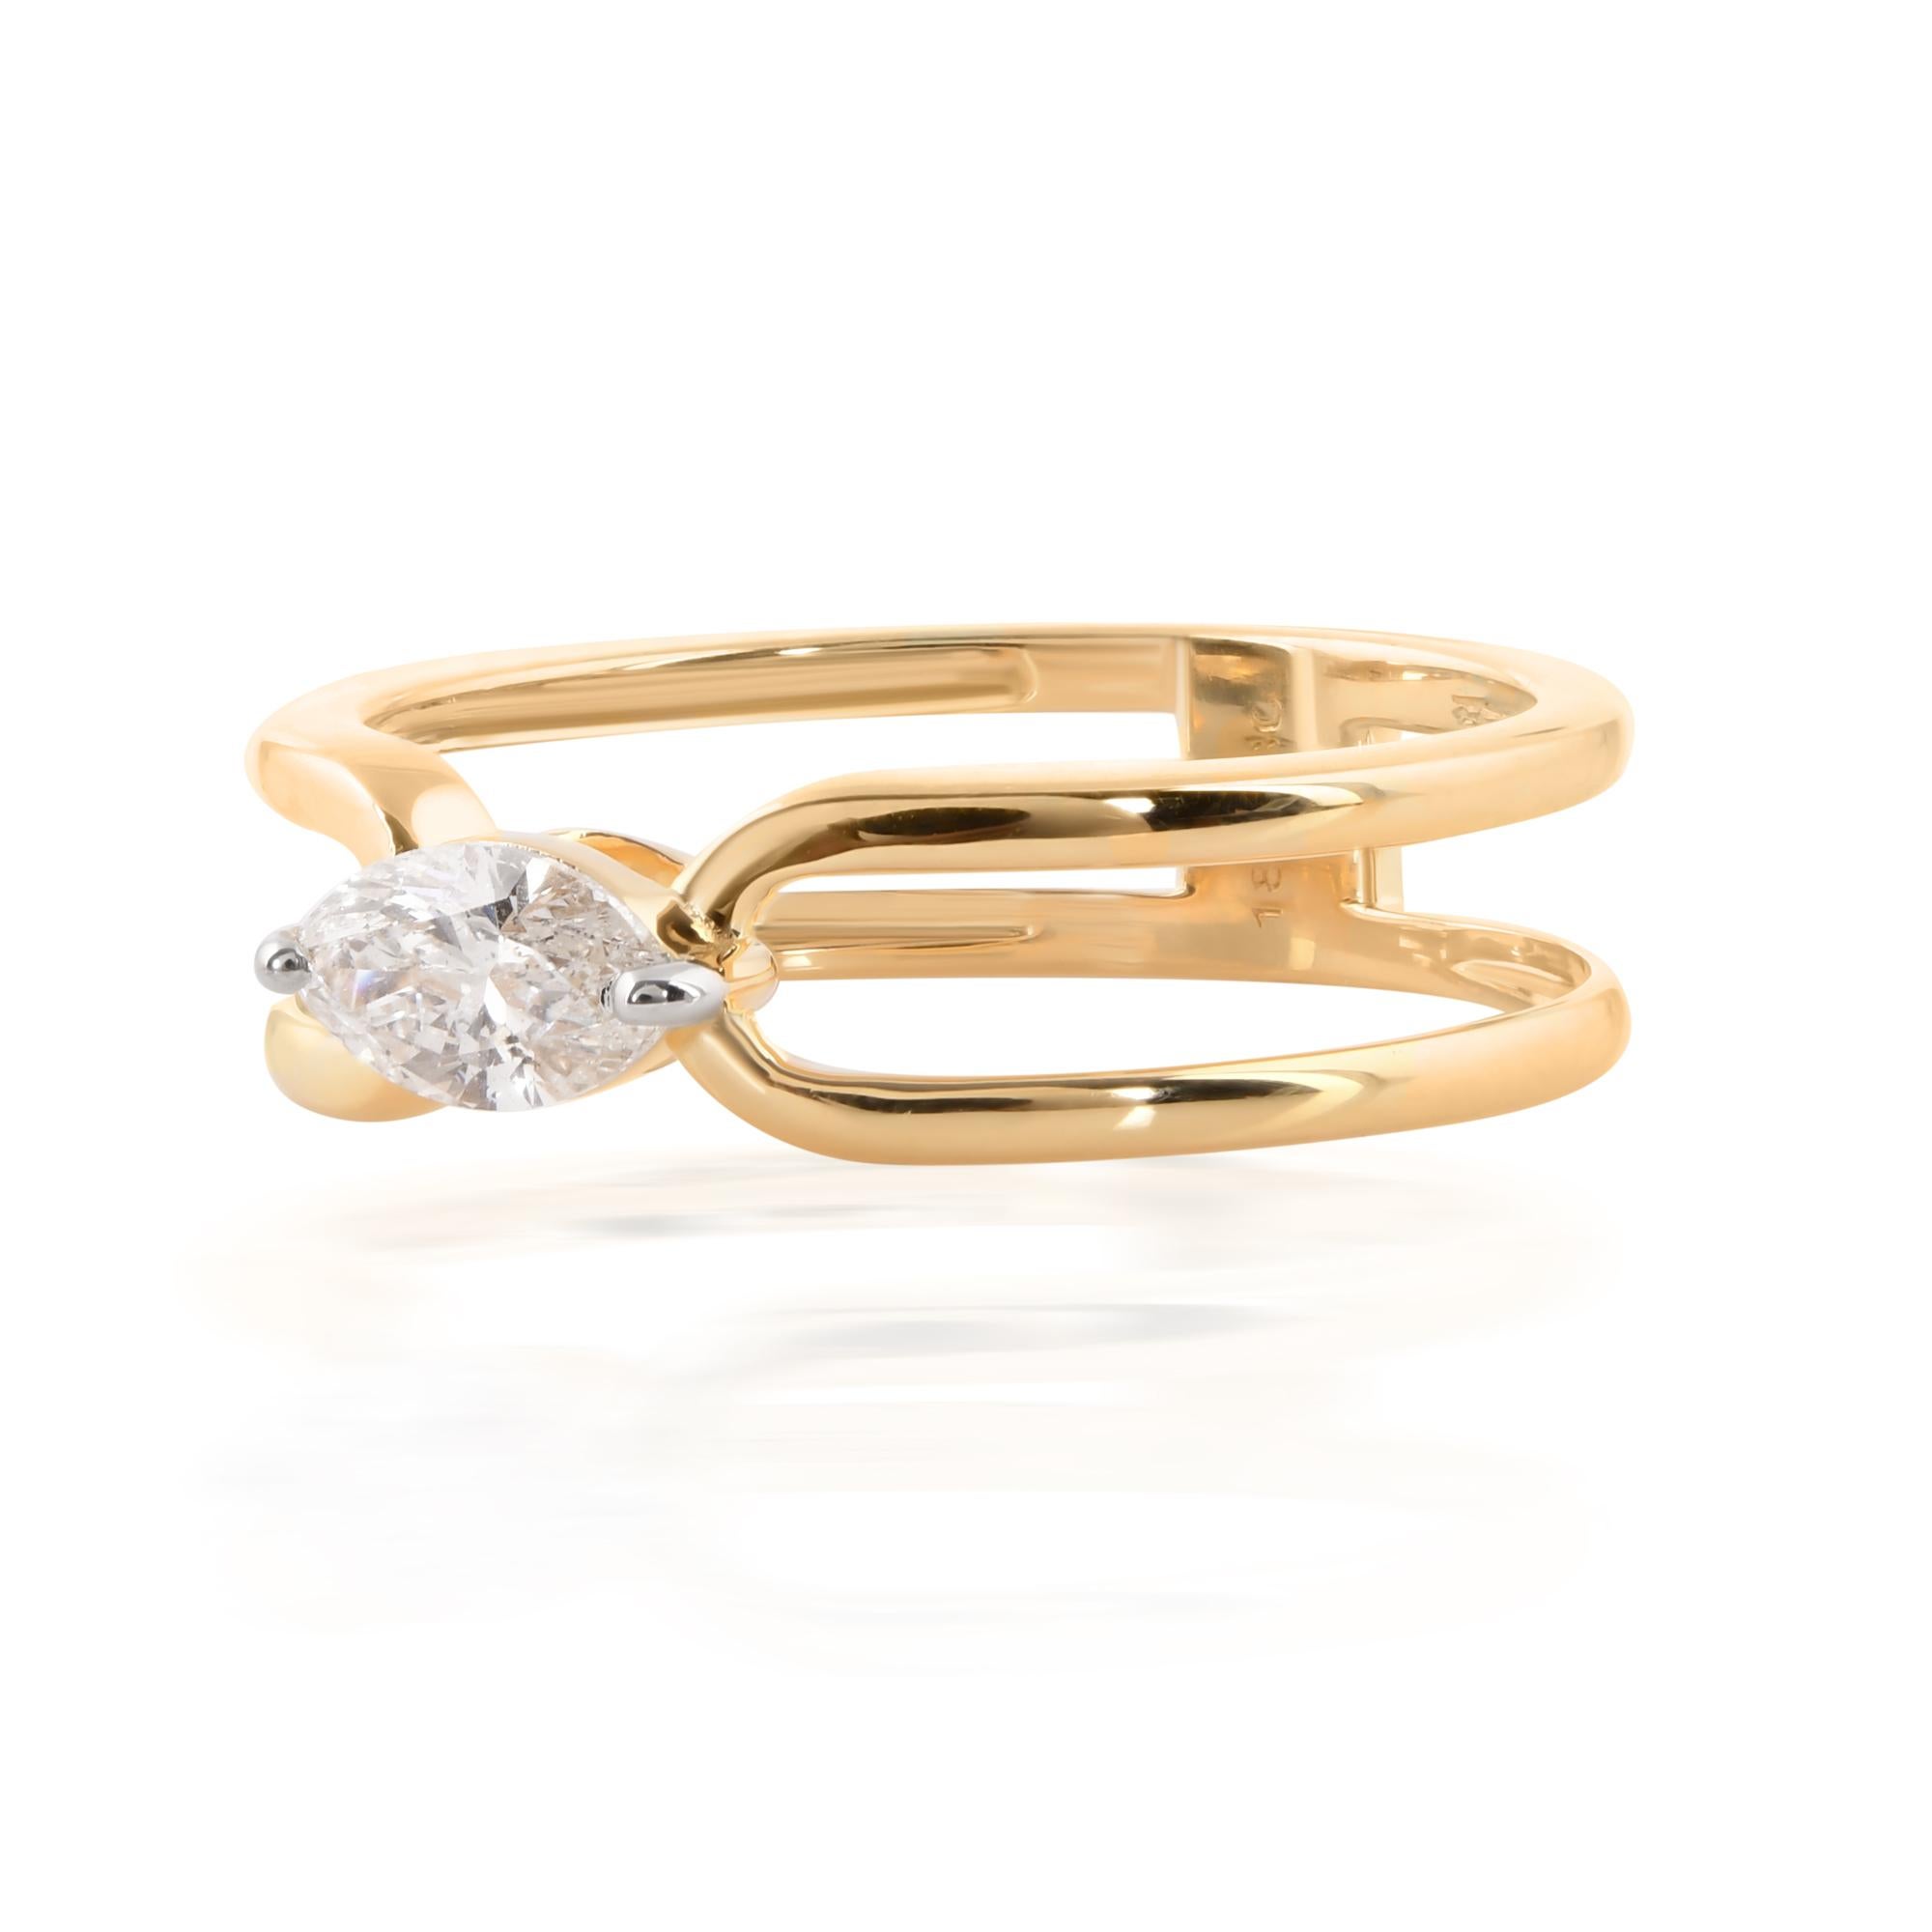 Immerse yourself in the unmatched beauty and elegance of this Natural SI Clarity HI Color Solitaire Marquise Diamond Ring, meticulously crafted in radiant 18 karat yellow gold. This exquisite piece of fine jewelry is a timeless symbol of love and